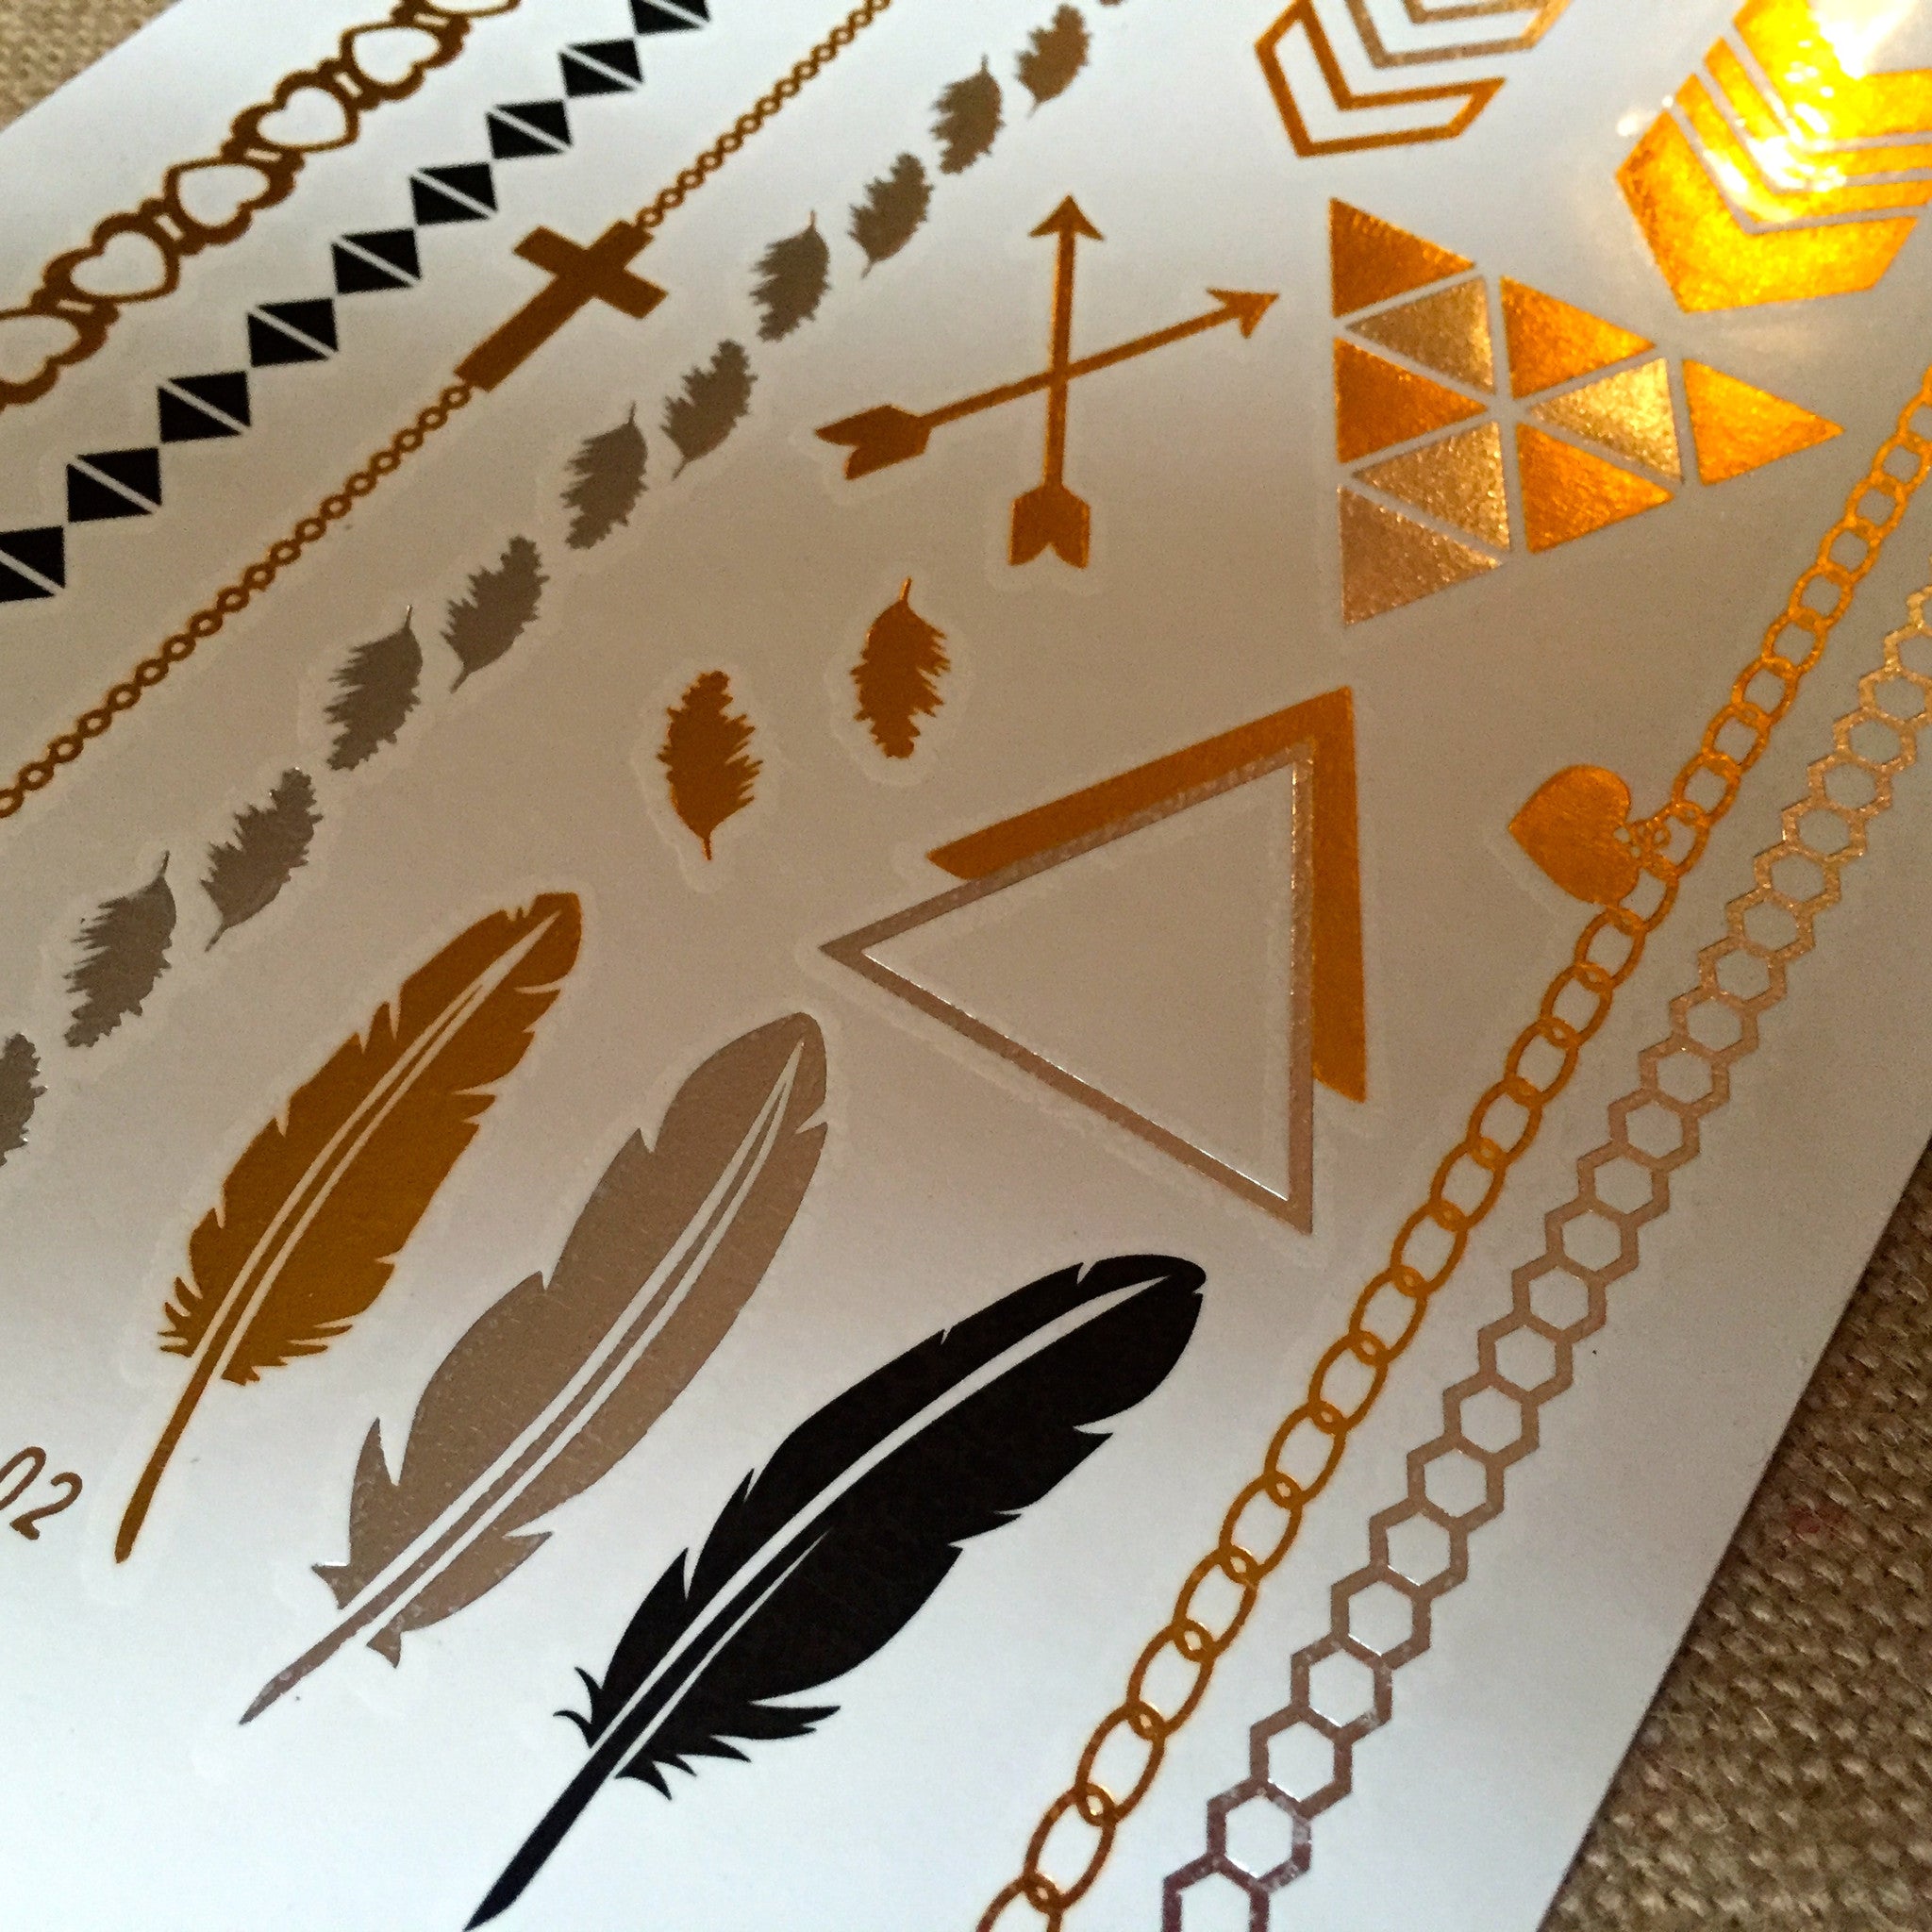 Hot-Jewels Metallic Temporary Tattoos are My New Fave - Popsicle Blog